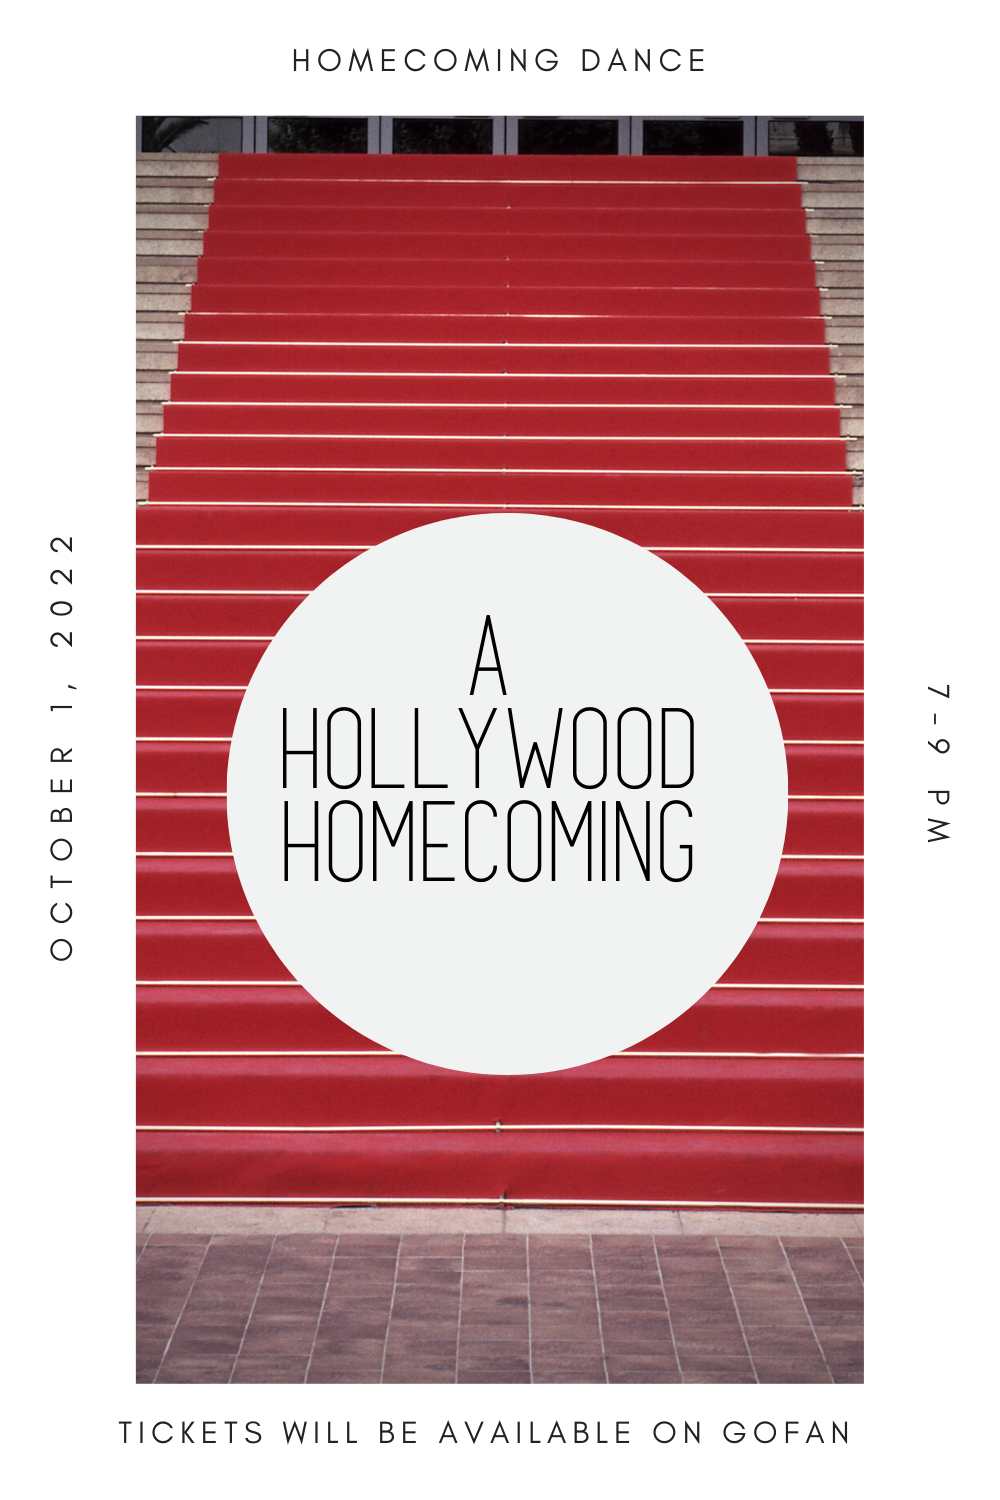 October 1st, Homecoming Dance 7-9 PM Tickets on GoFan "A Hollywood Homecoming" Image of spotlight and red carpet